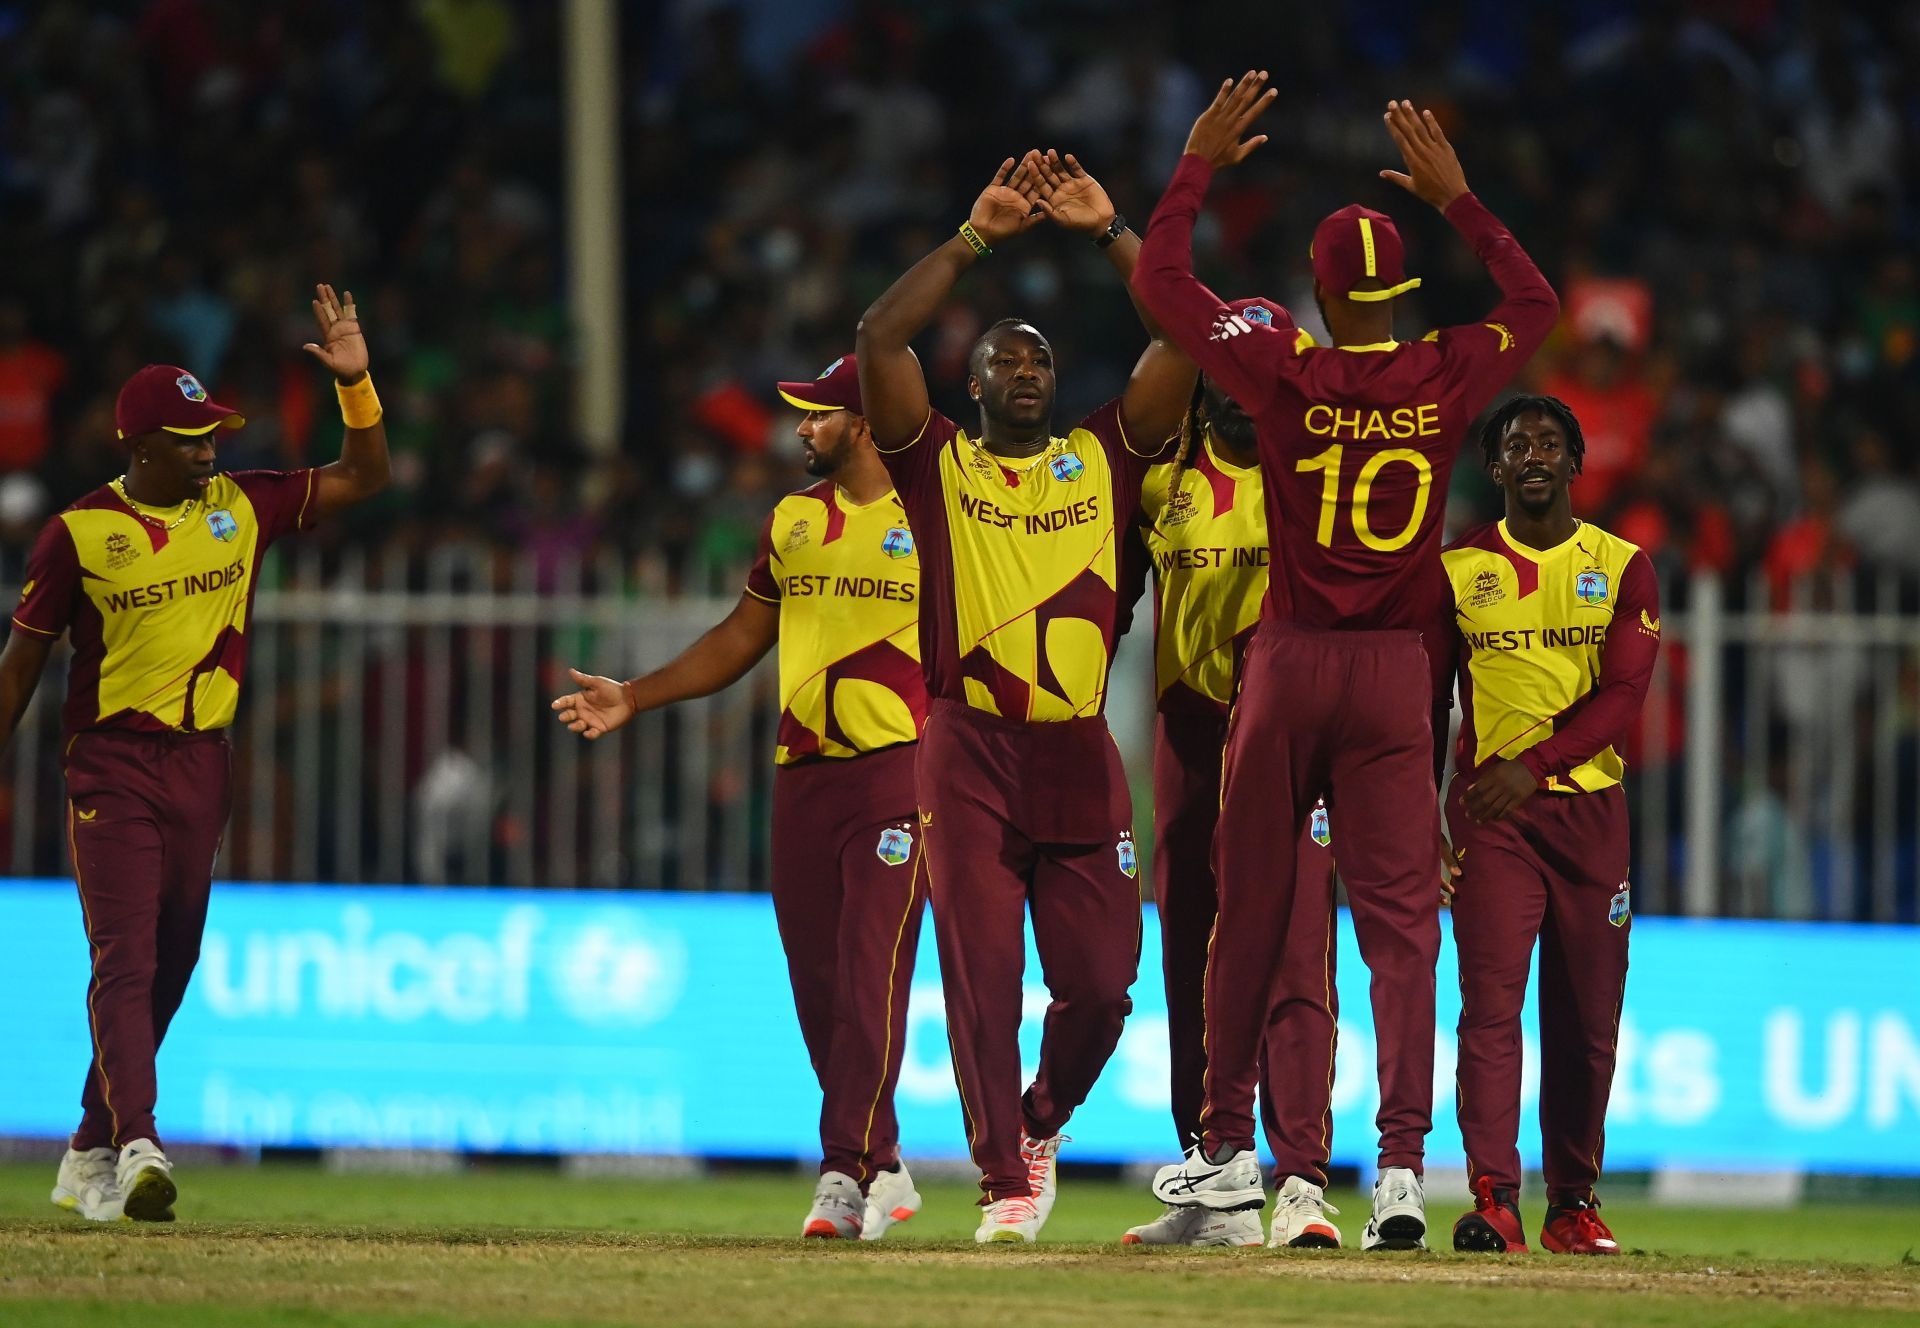 West Indies secured a crucial victory against Bangladesh